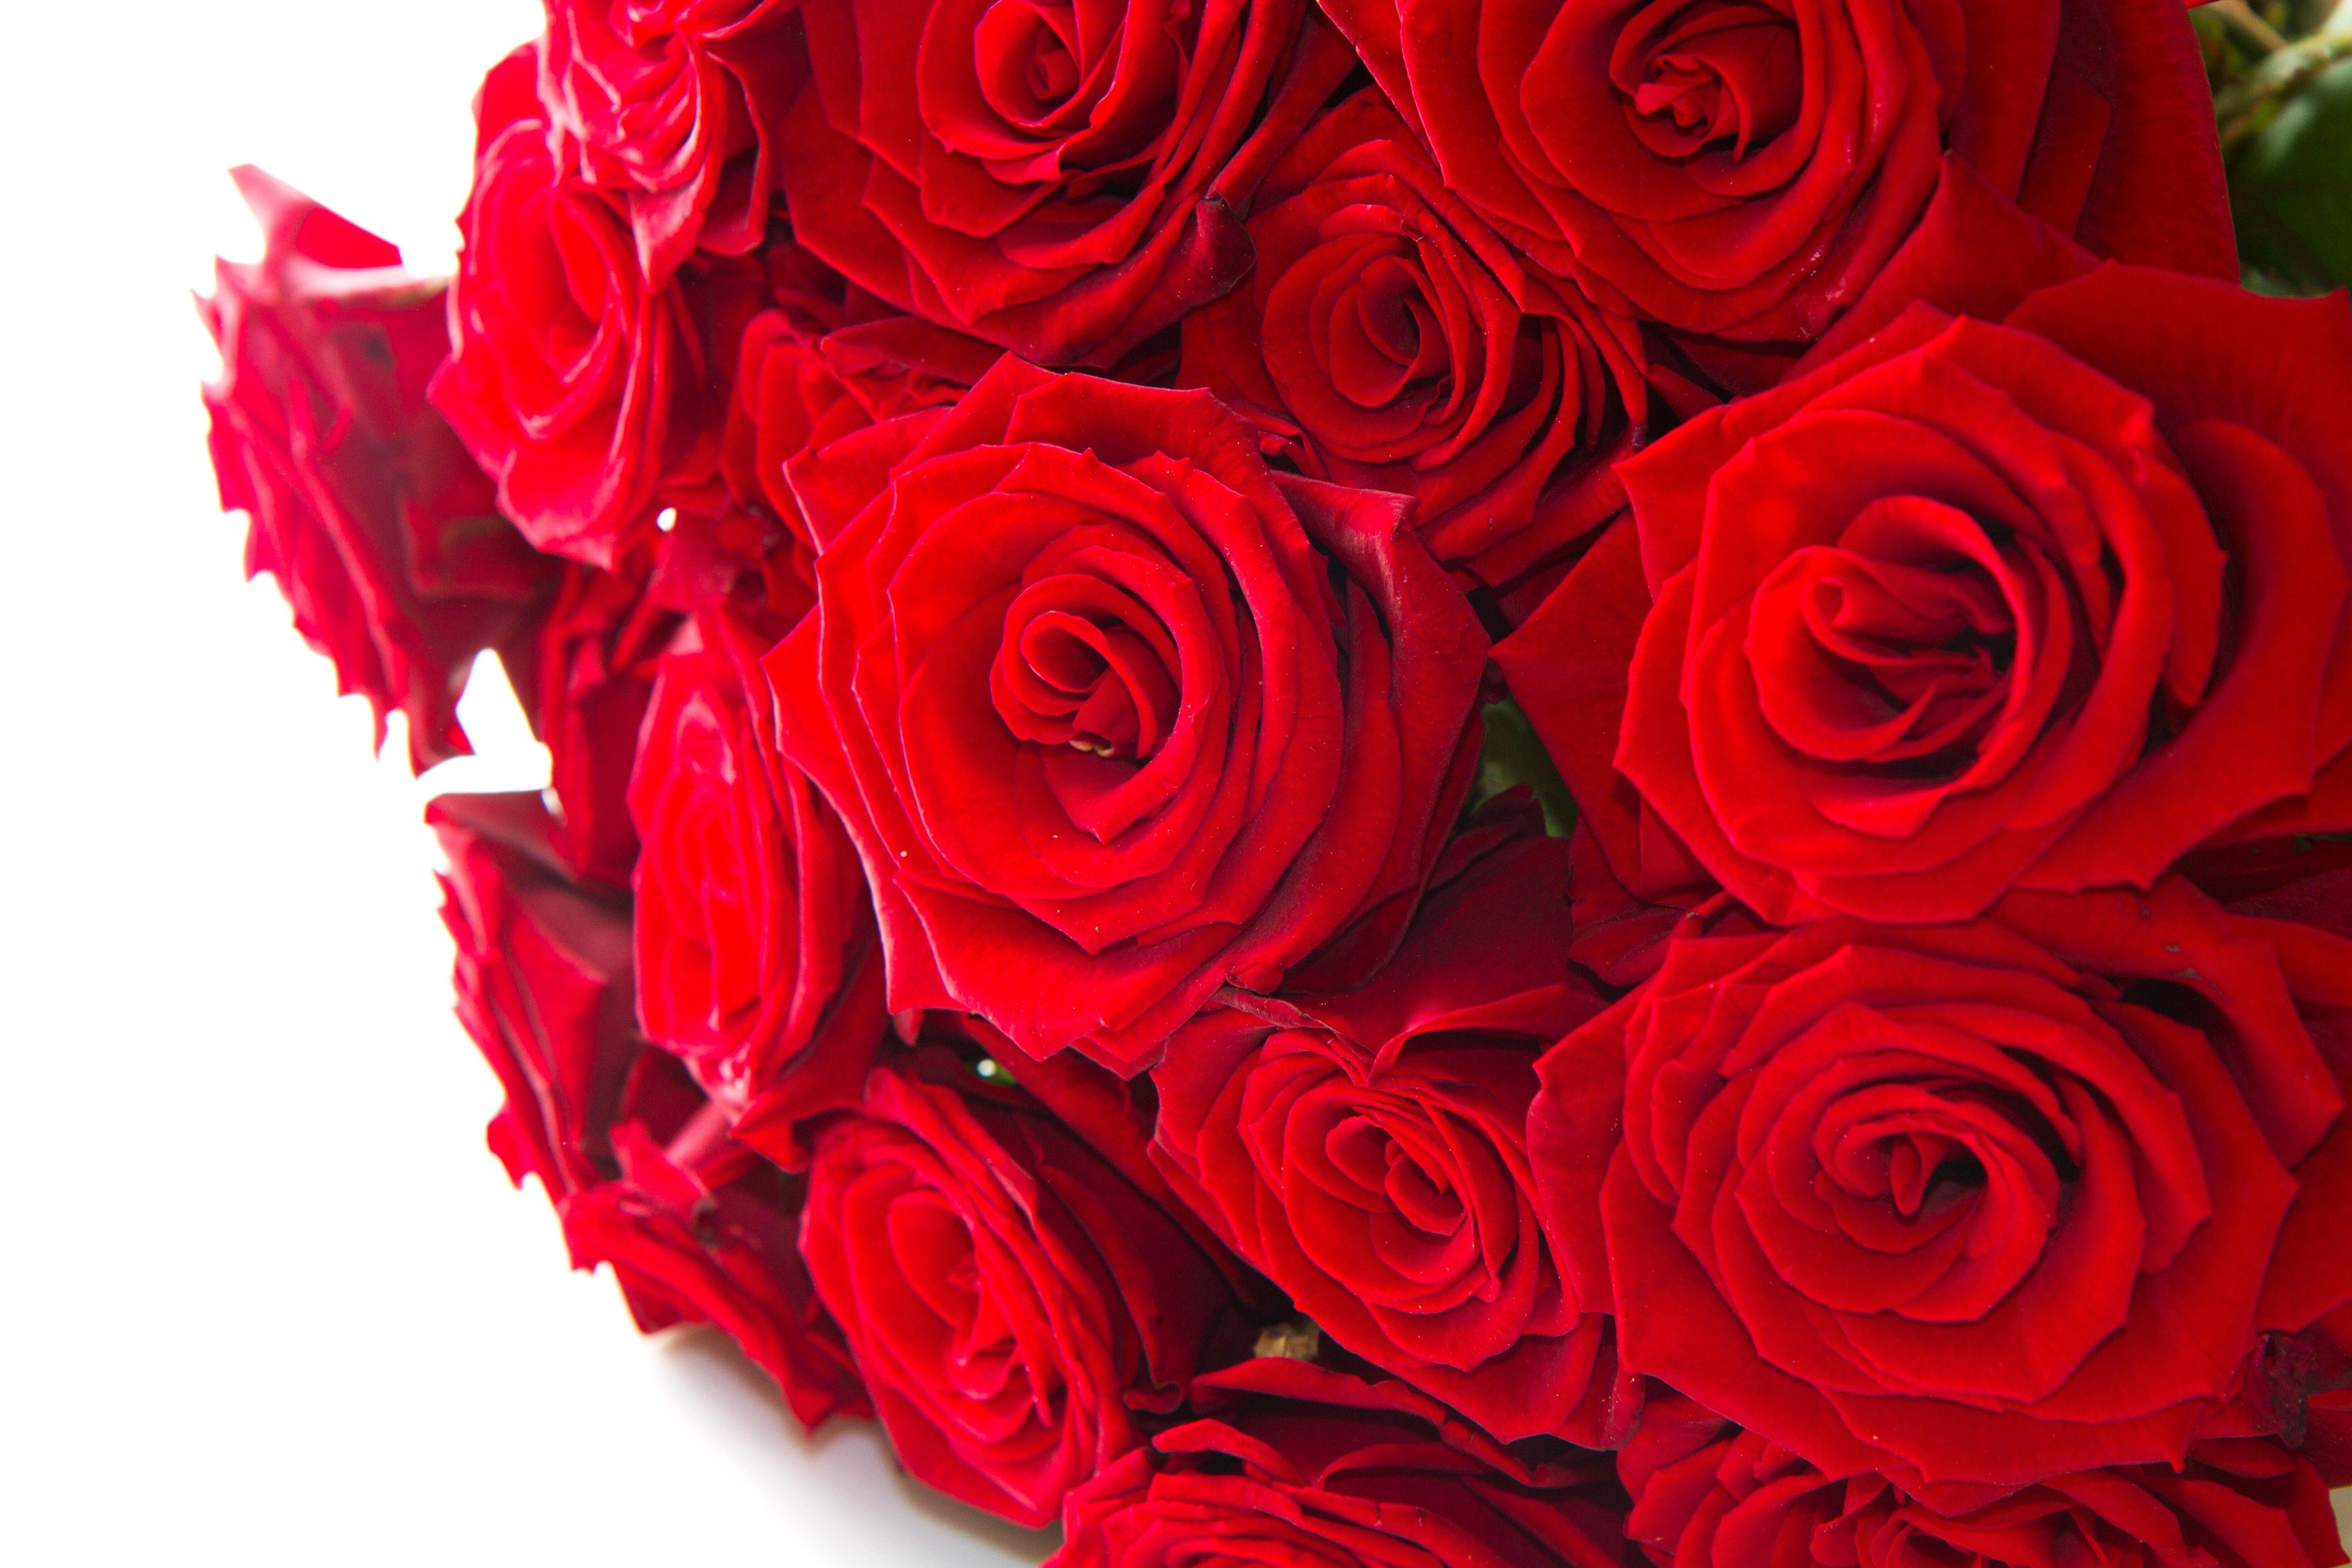 Nature Flowers Red Love Valentines Day Rose Roses Wallpaper